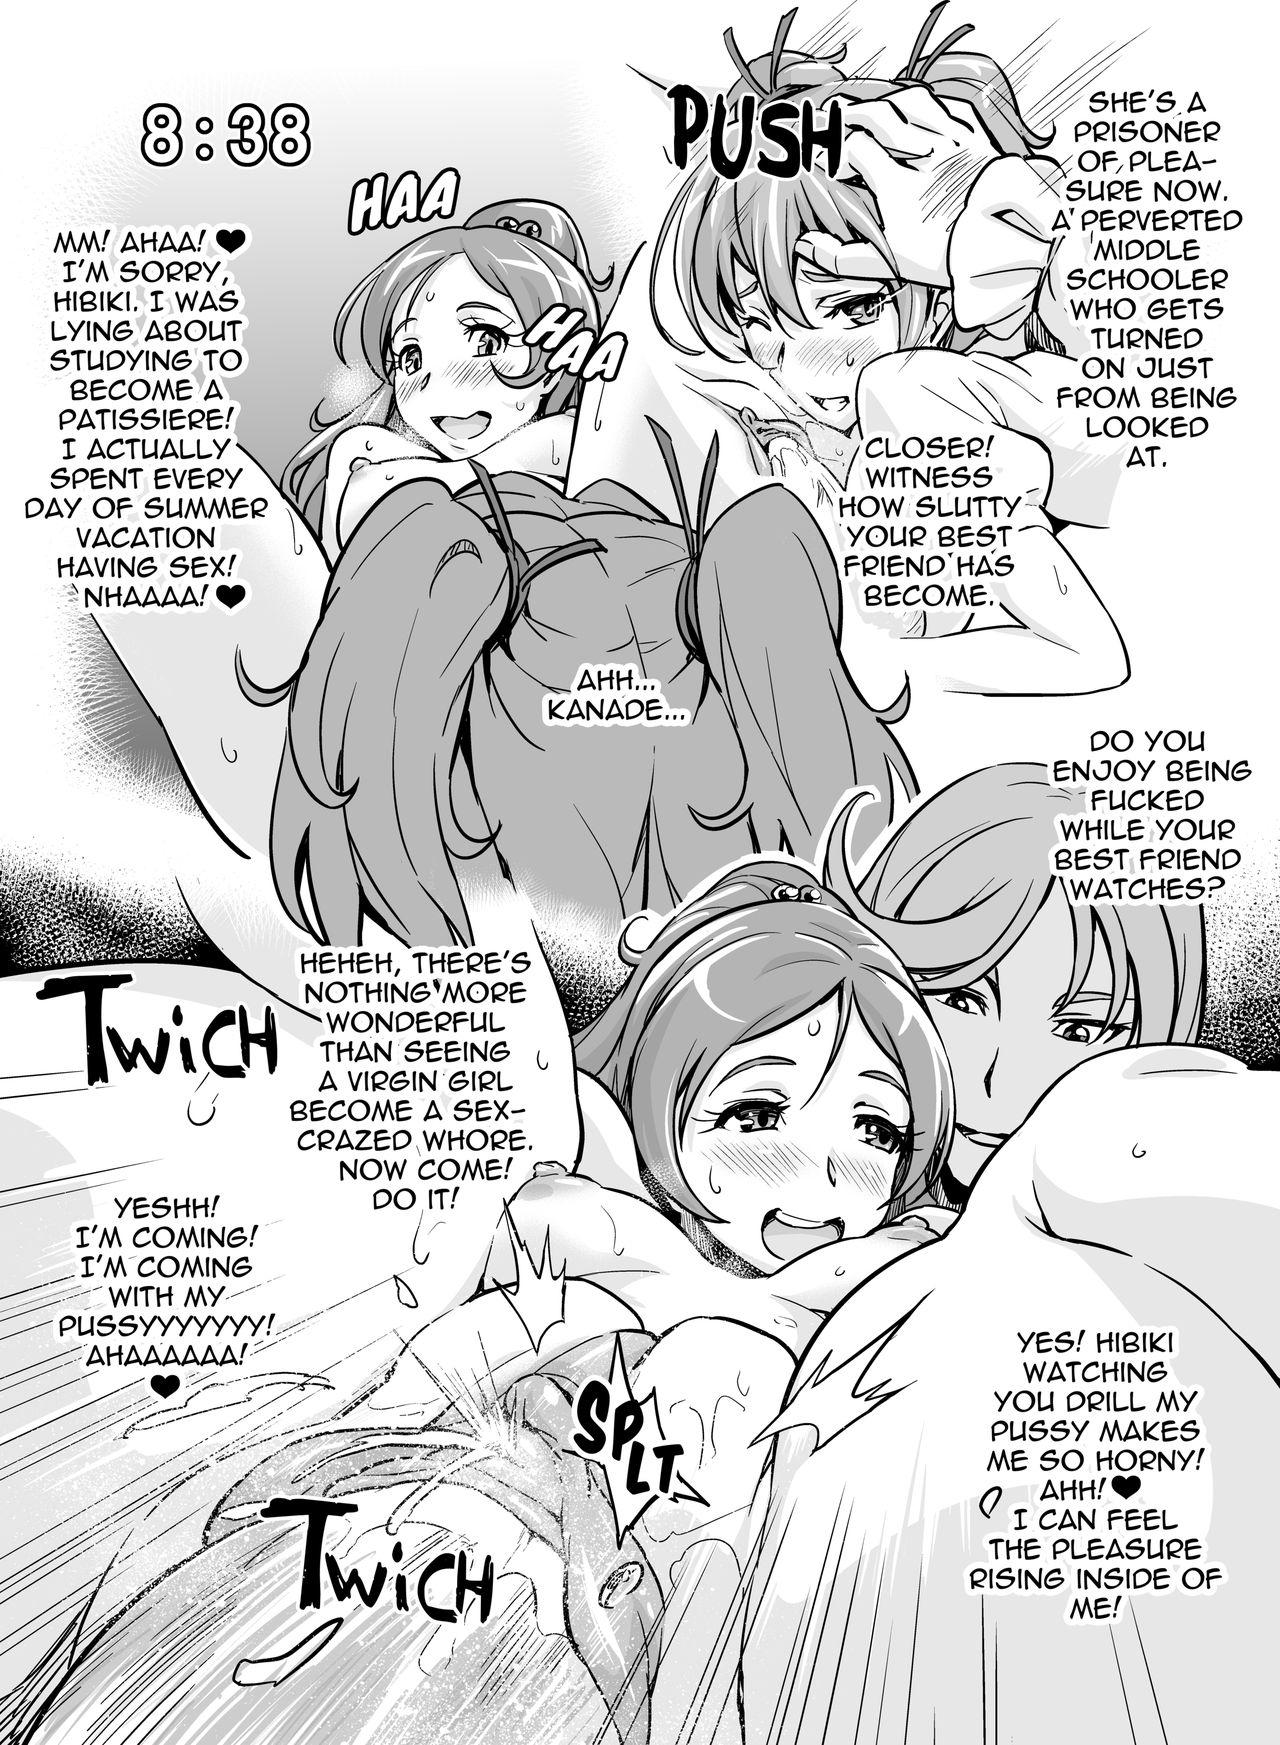 Worship MeloRhythm - Suite precure Fodendo - Page 5